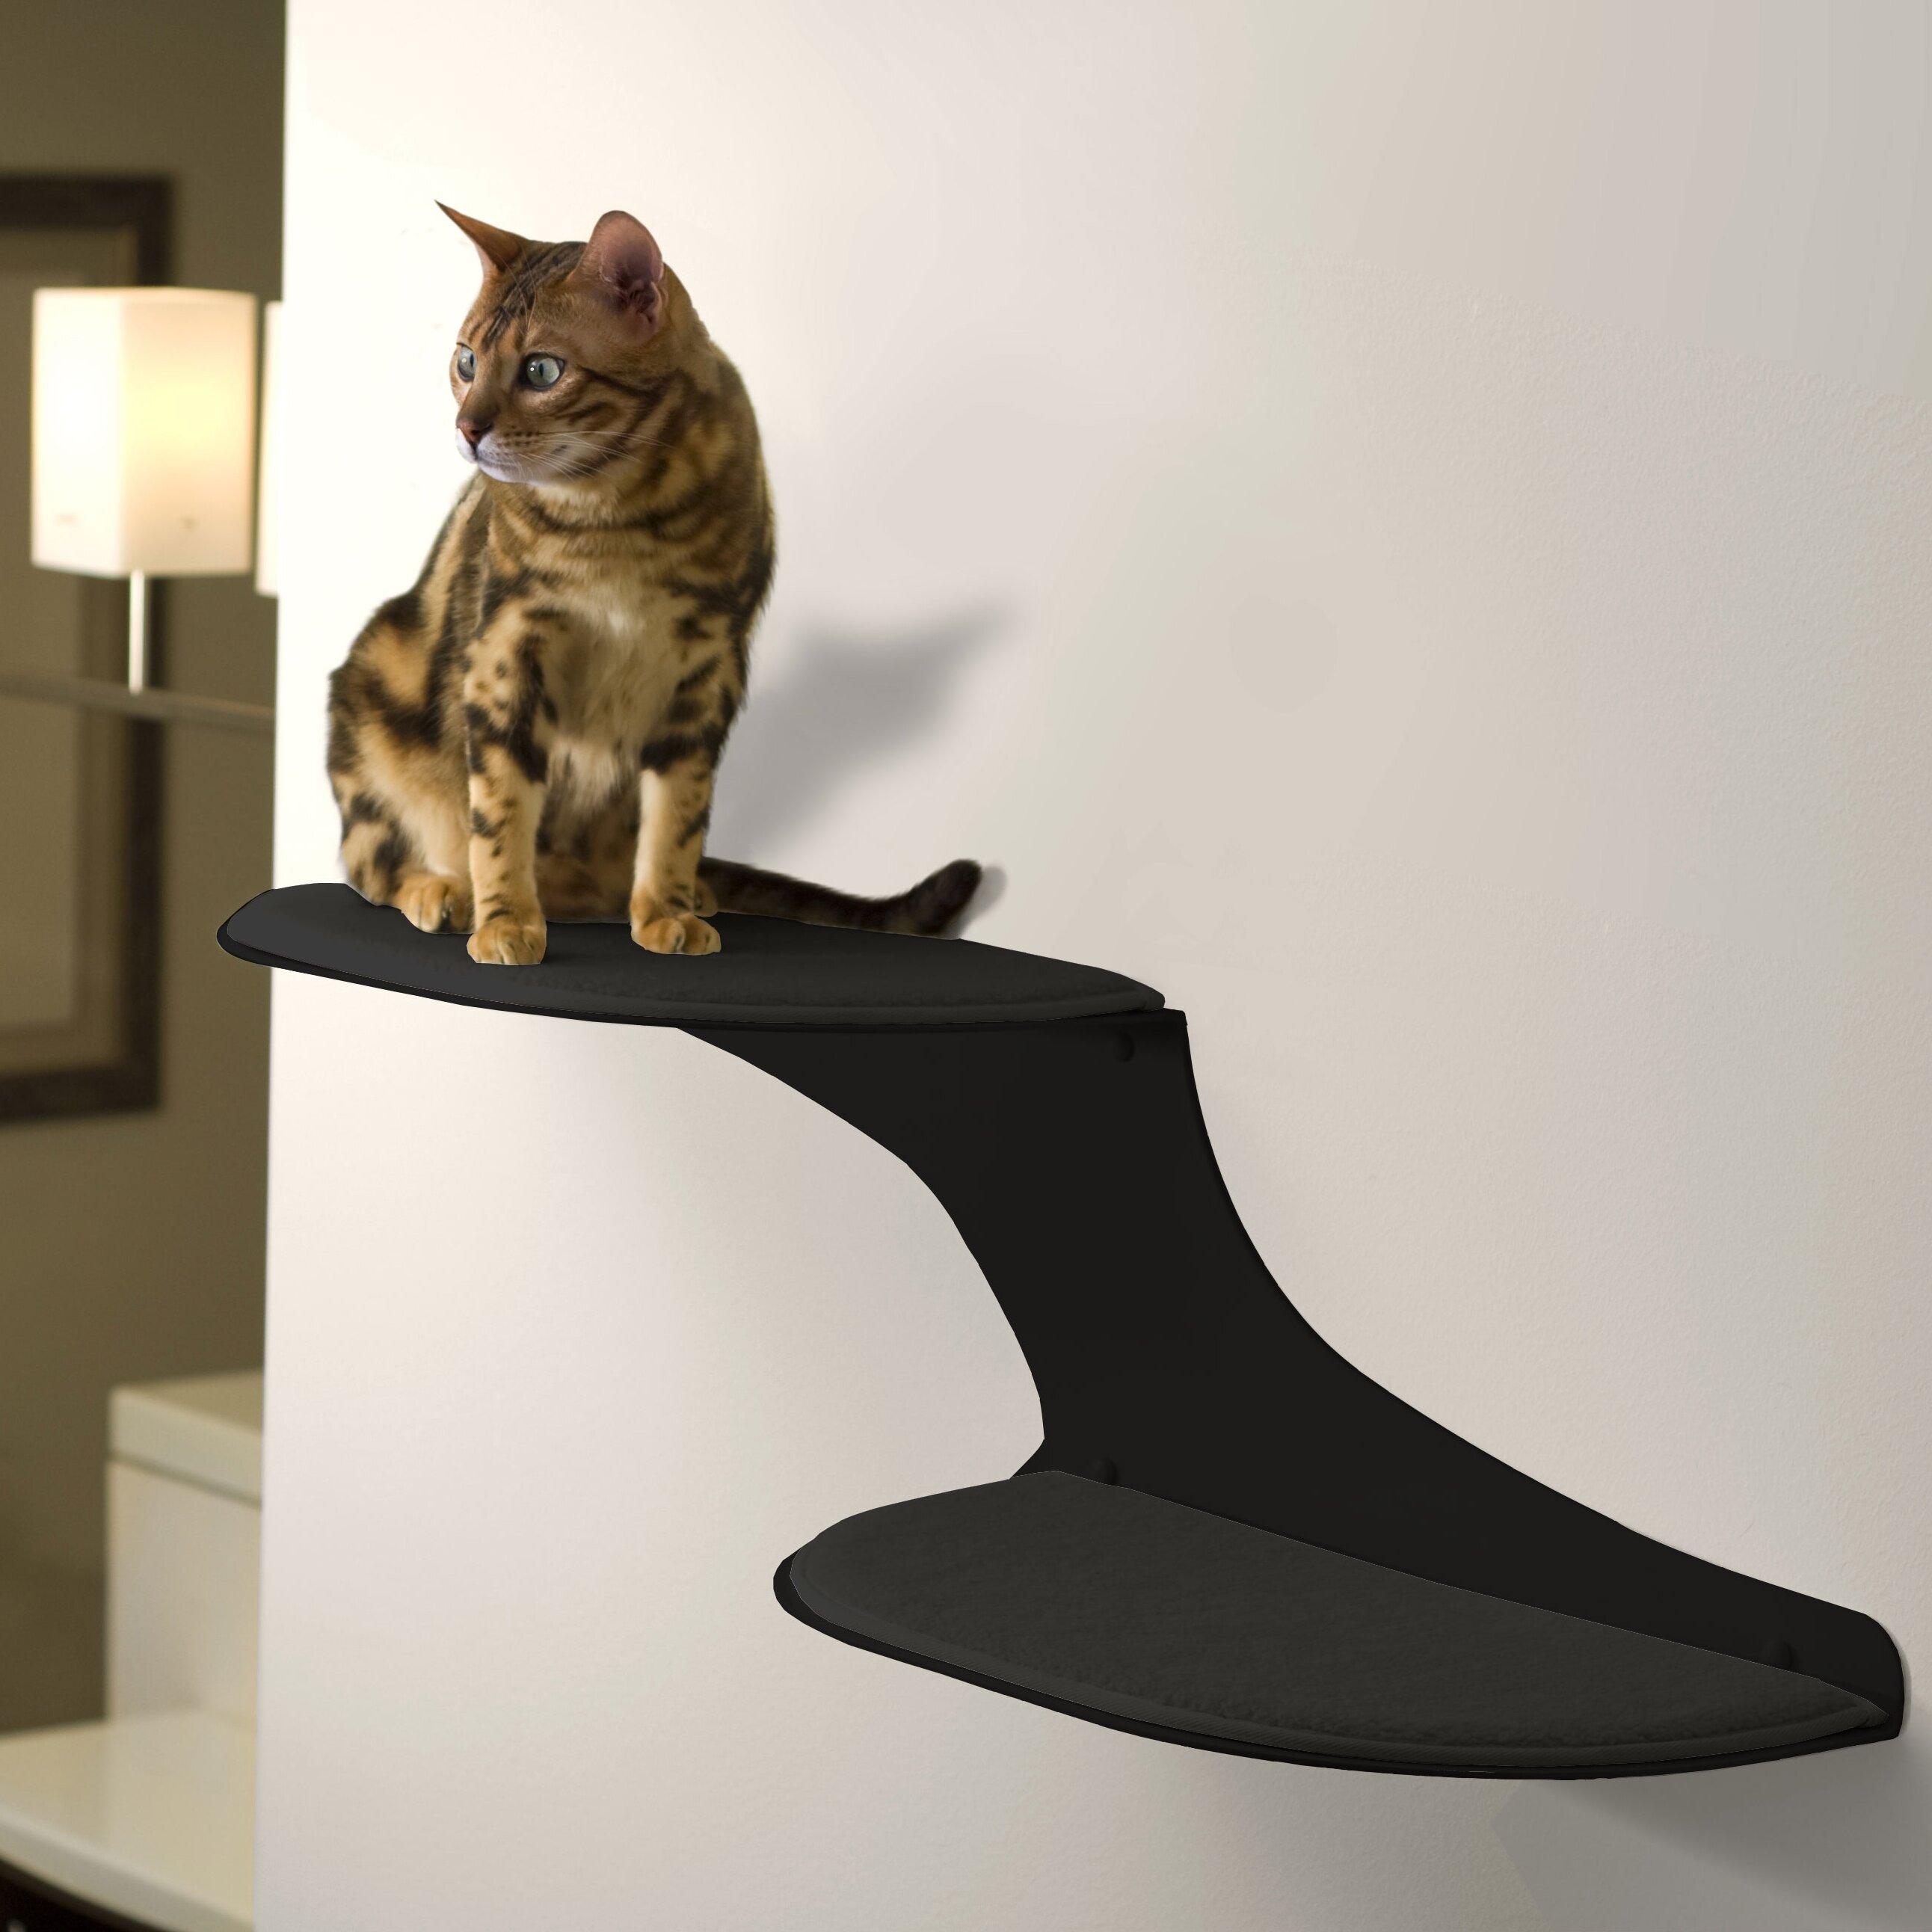 The Refined Feline 10" Clouds Wall Mounted Cat Perch ...